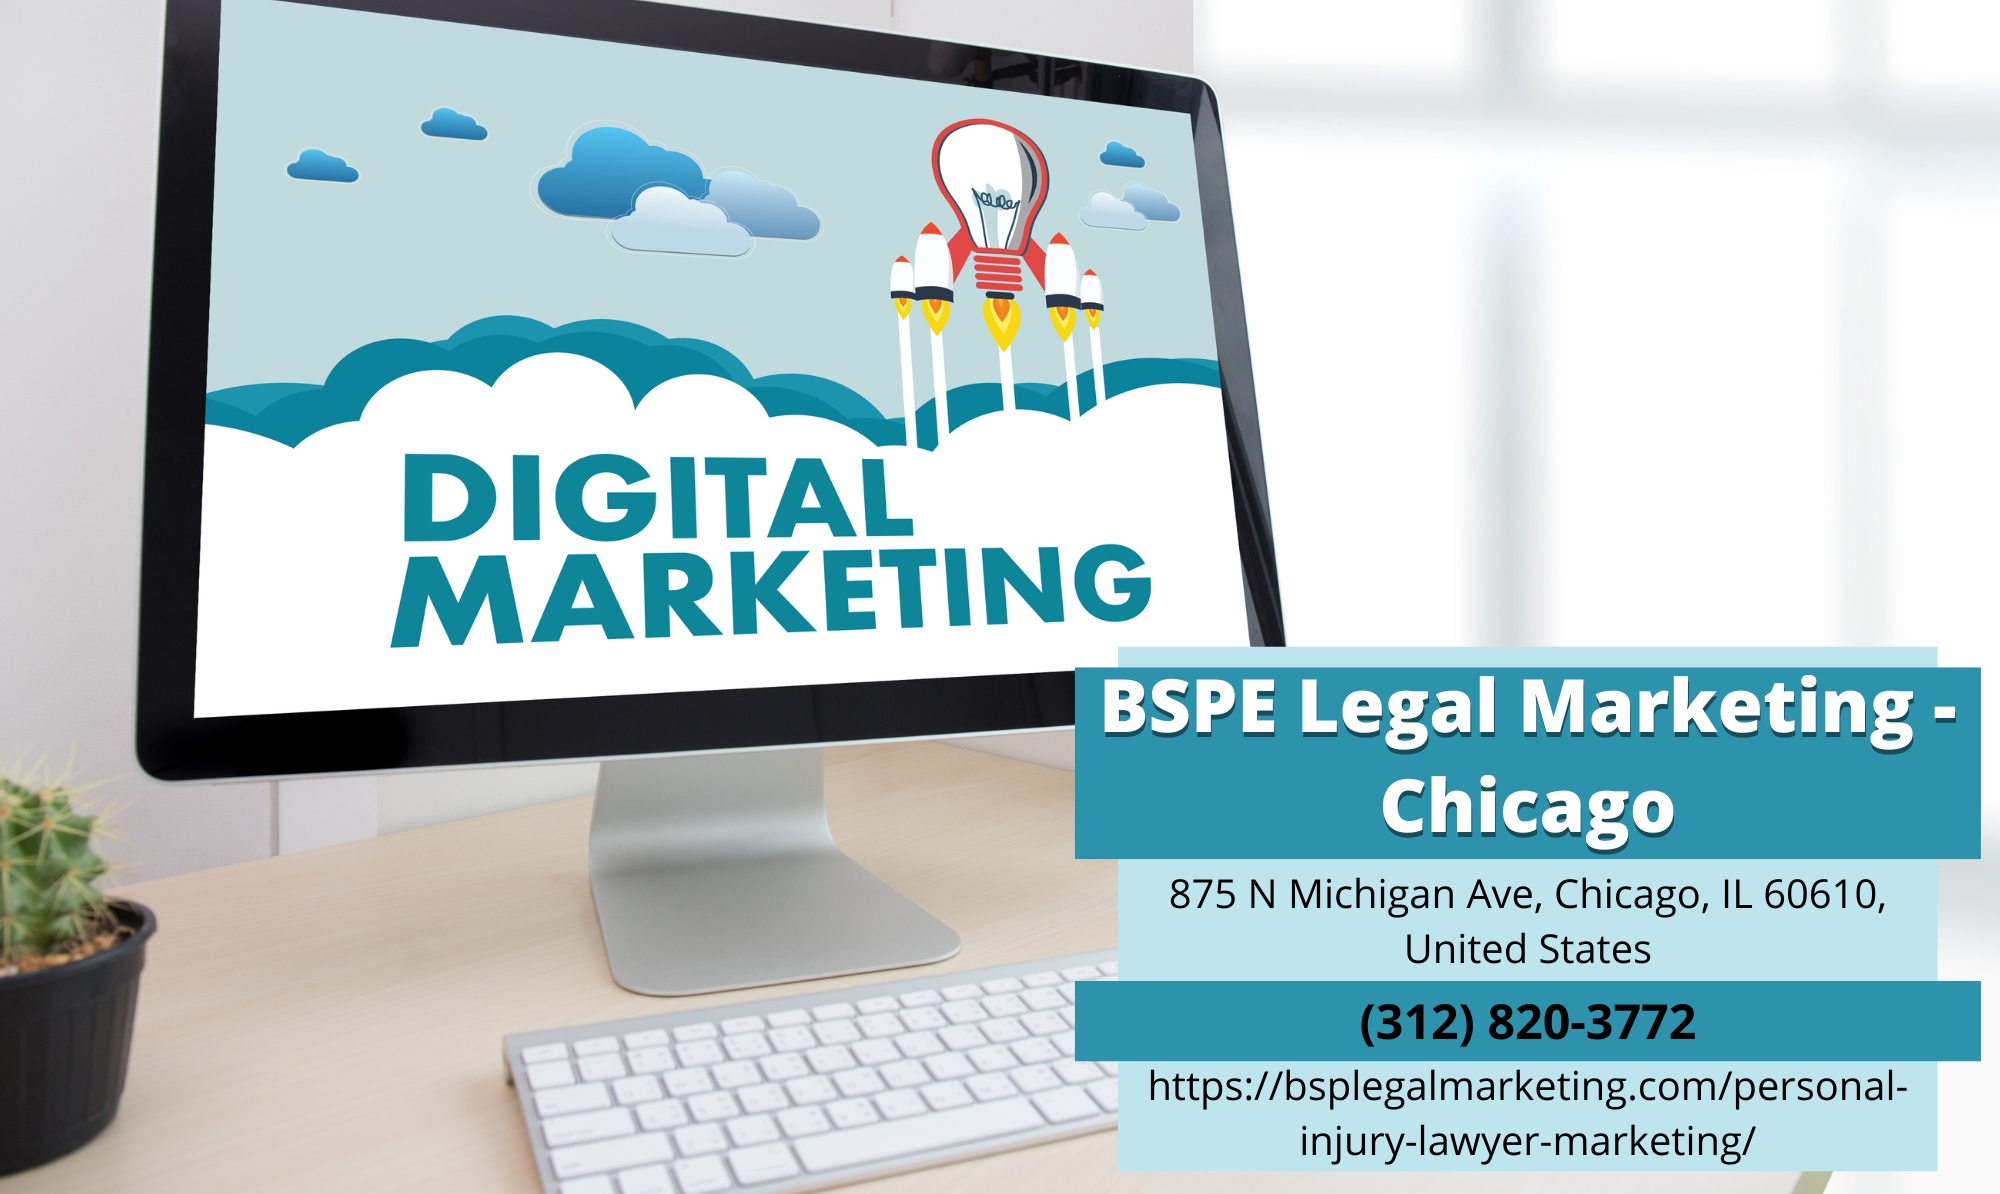 BSPE Legal Marketing Releases Comprehensive Guide on Personal Injury Lawyer Marketing